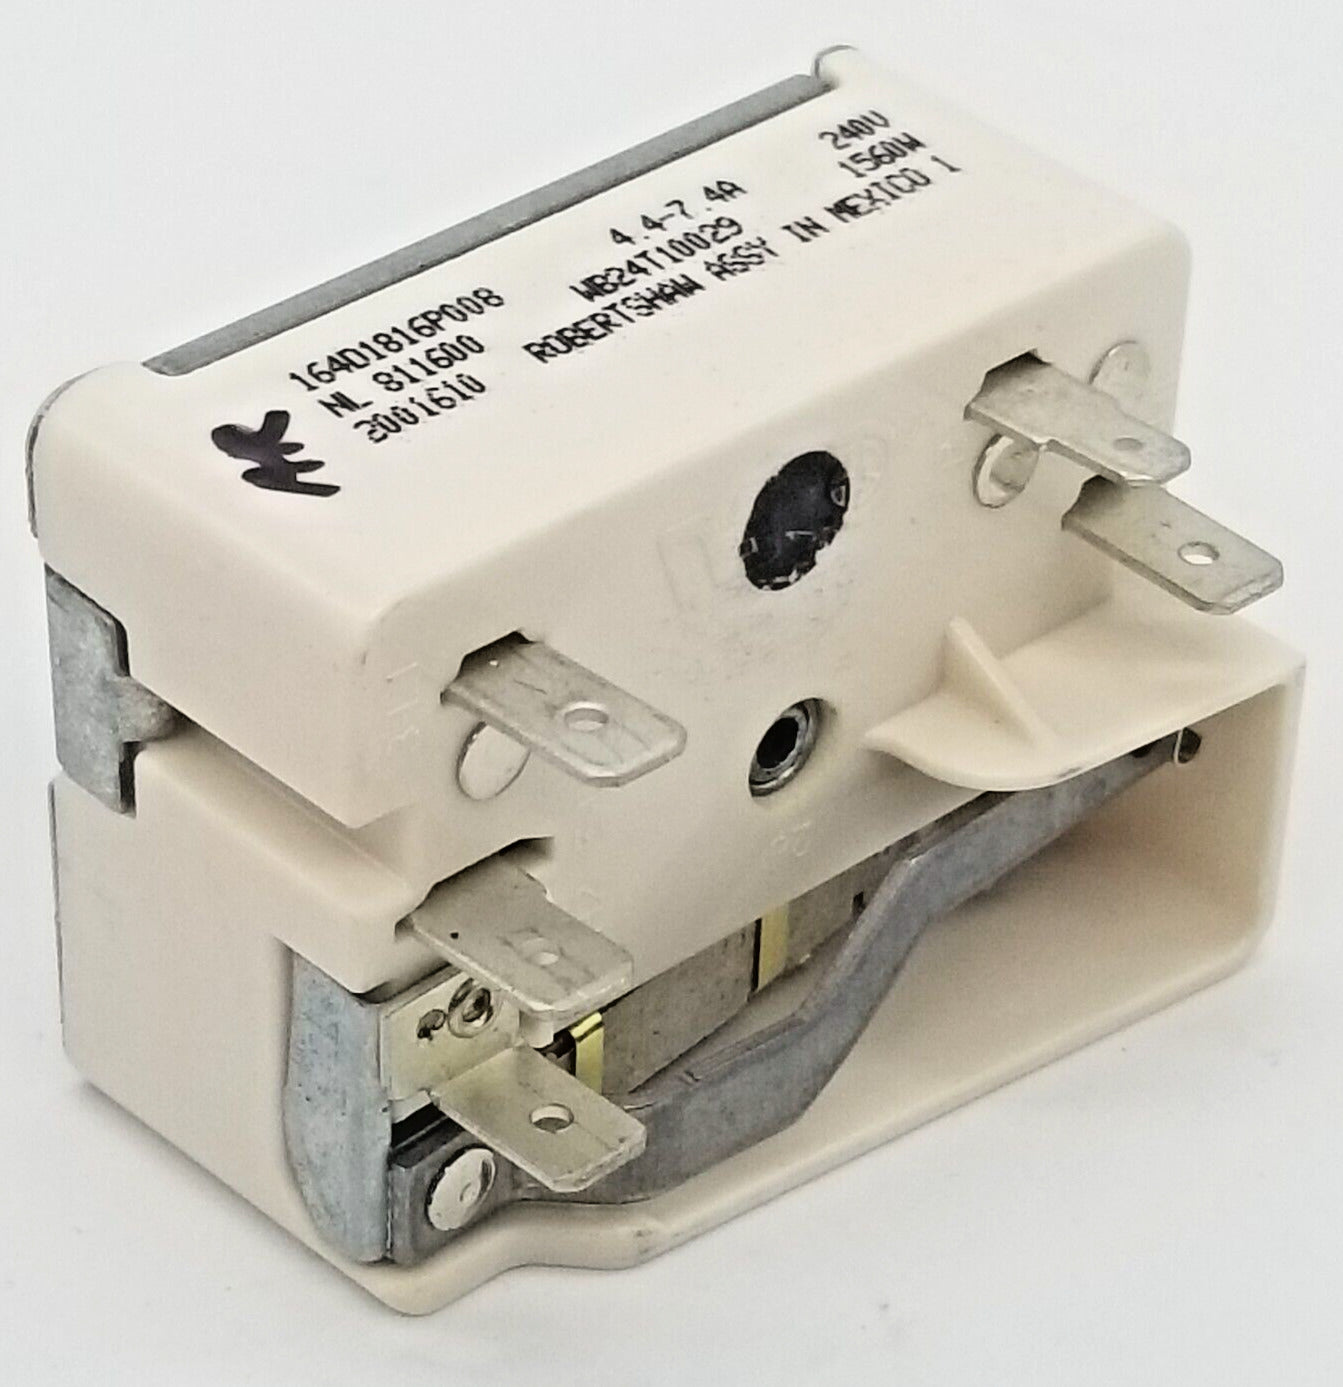 New OEM Replacement for GE Range Control Switch 164D1816P008